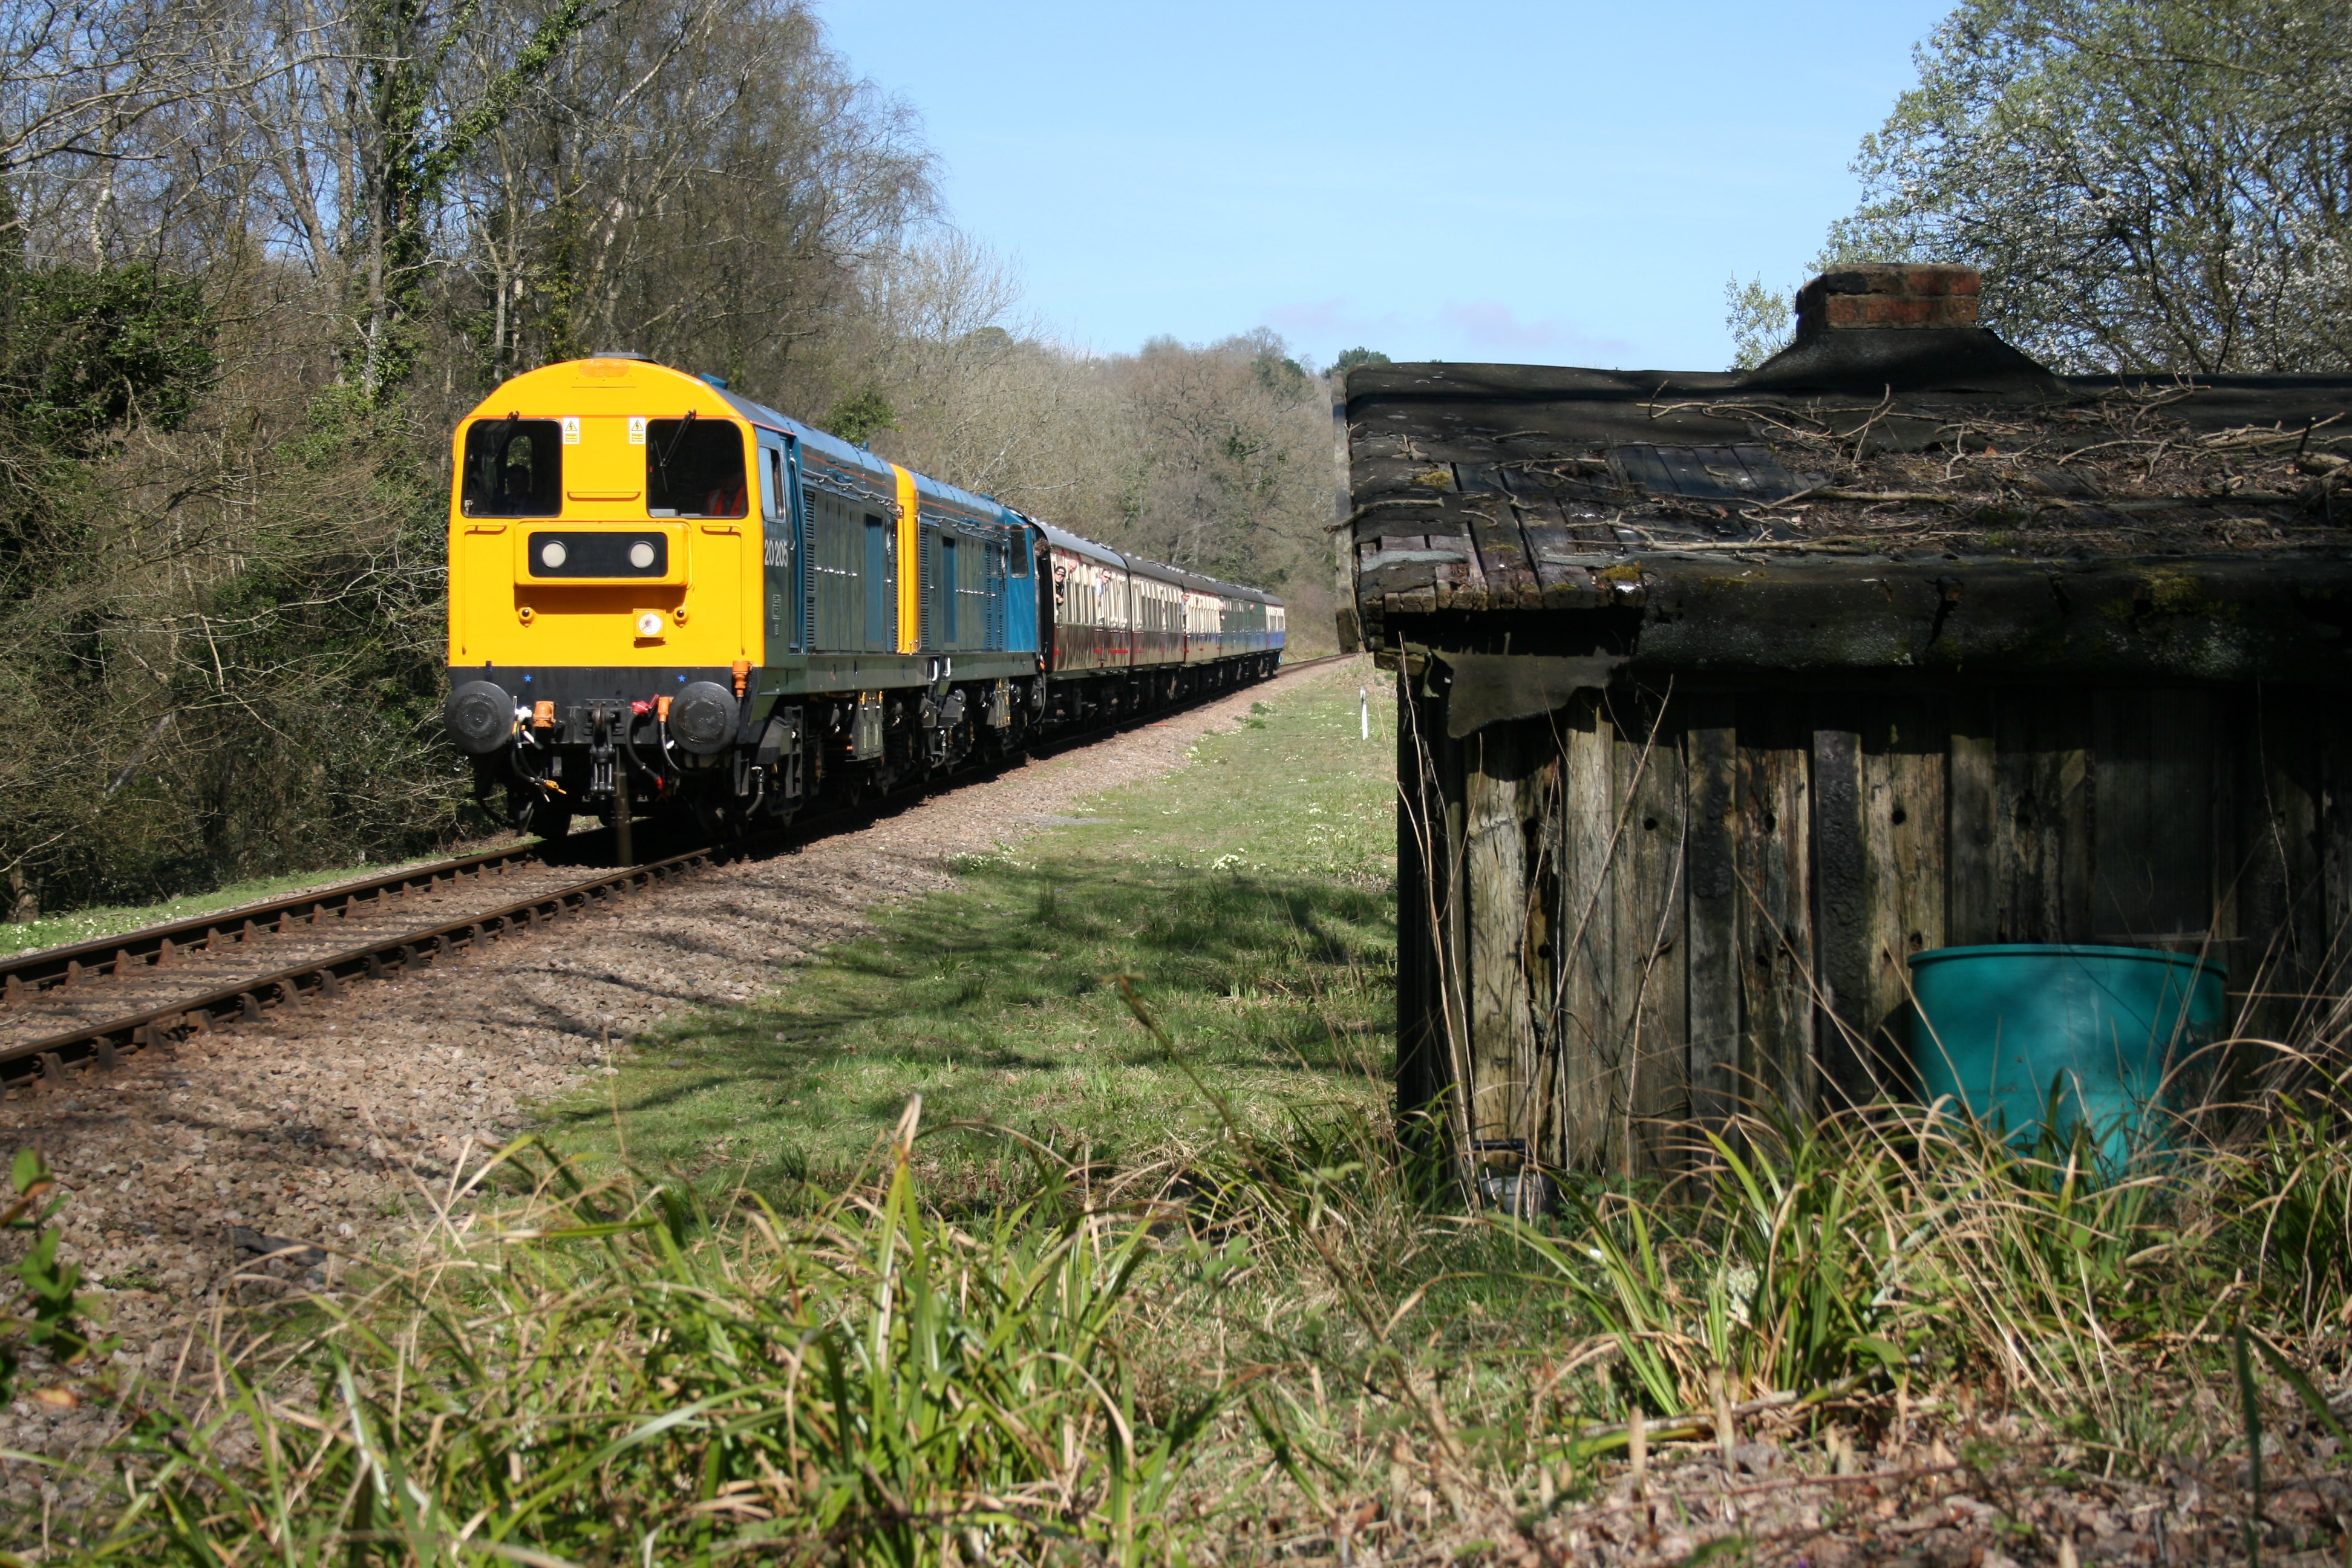 Railway tracks with yellow train and wooden shack